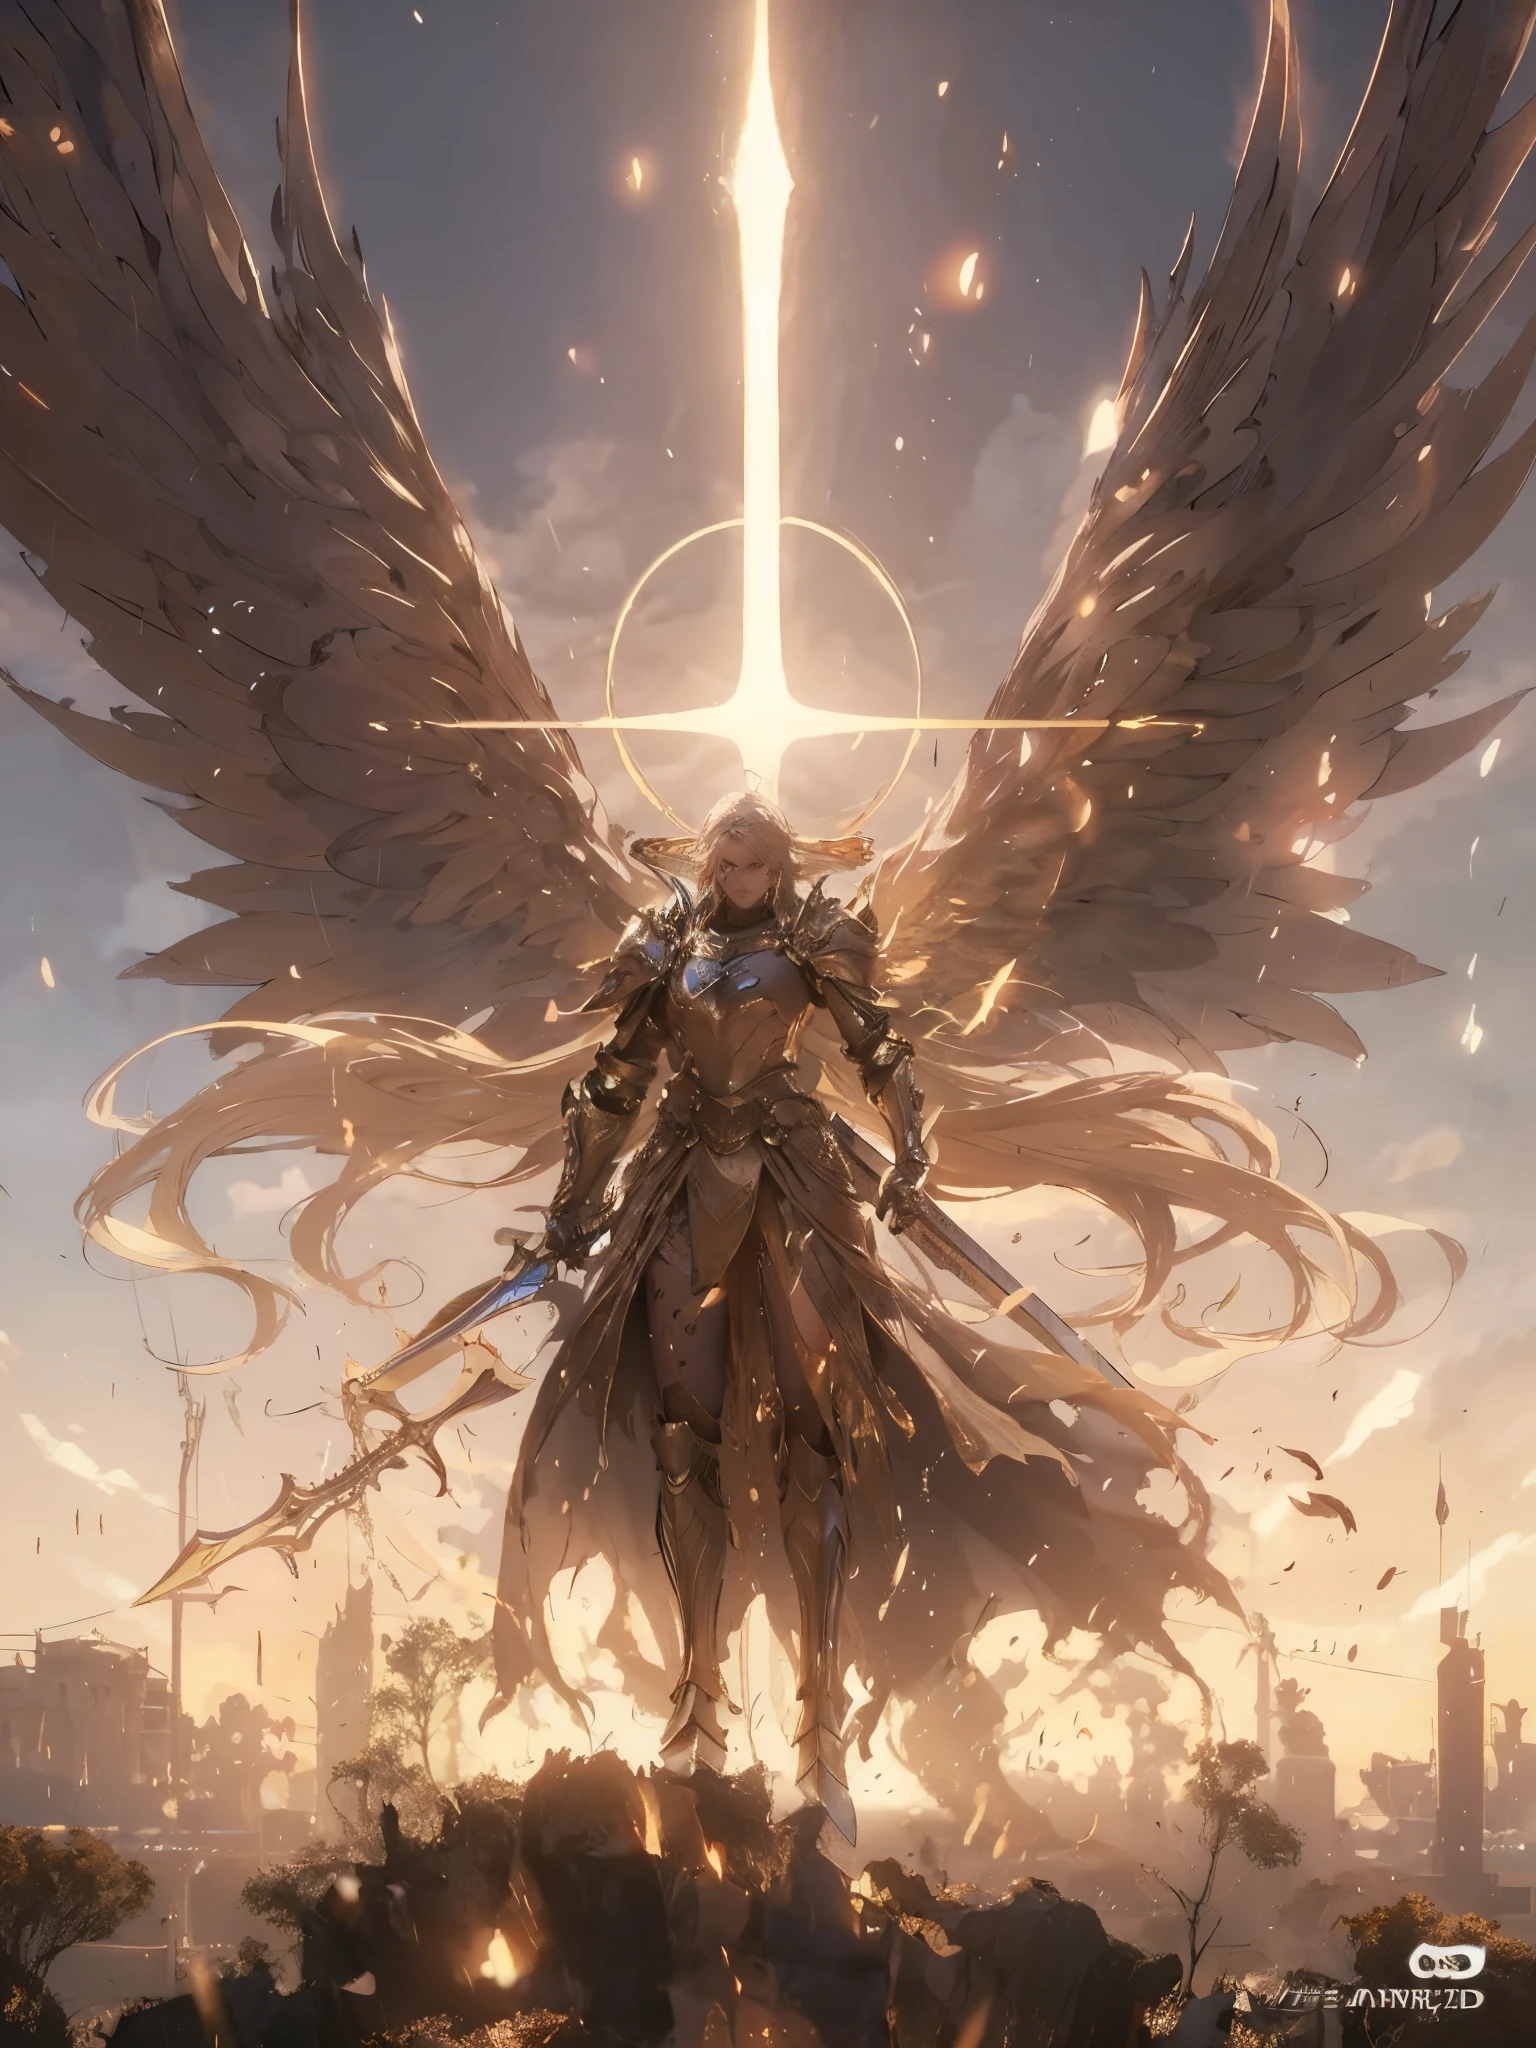 a close up of a person with a sword and wings, anime epic artwork, archangel, super wide angel, epic angel wings, from arknights, 2. 5 d cgi anime fantasy artwork, unreal engine render saint seiya, ethereal anime, an angel of the dawn light, by Yang J, armor angle with wing, the angel of death with a halo